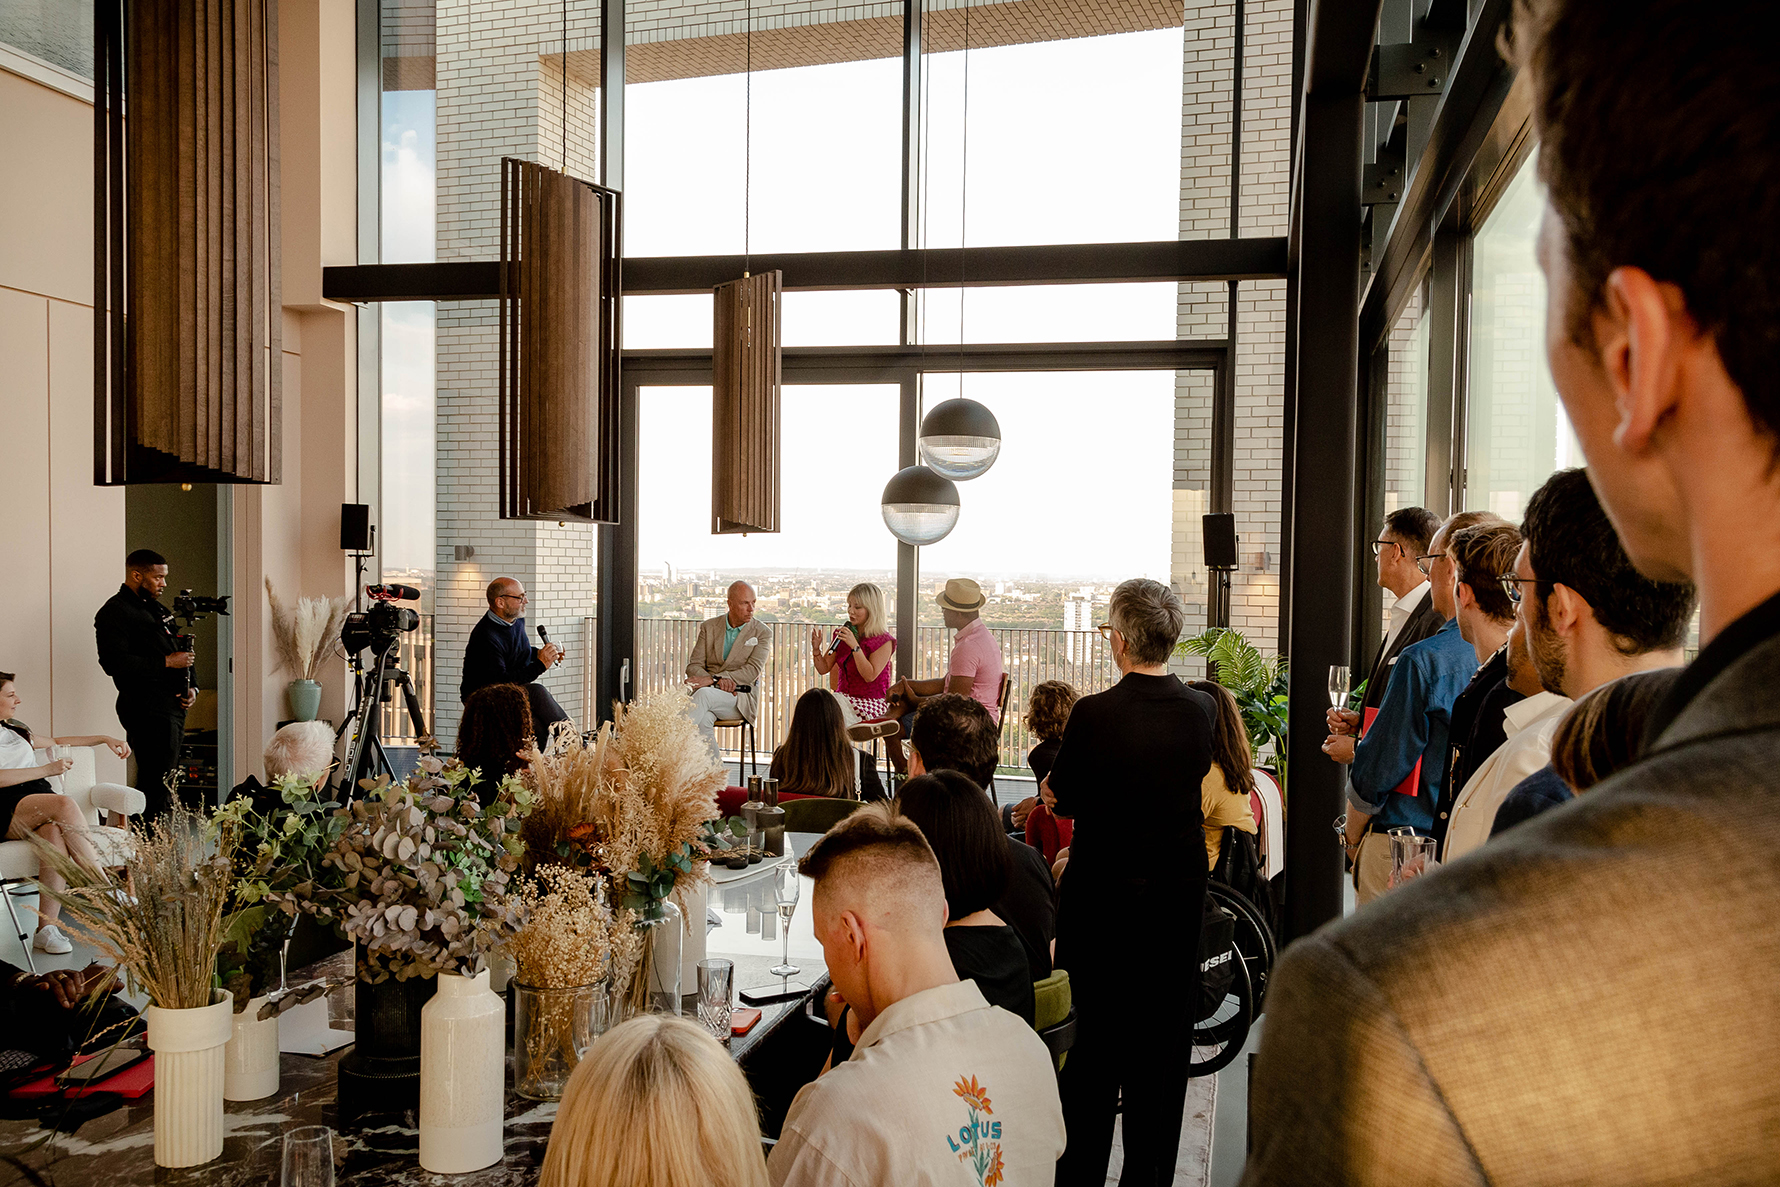 The crowd gathers in the Penthouse at London City Island to hear from the panel